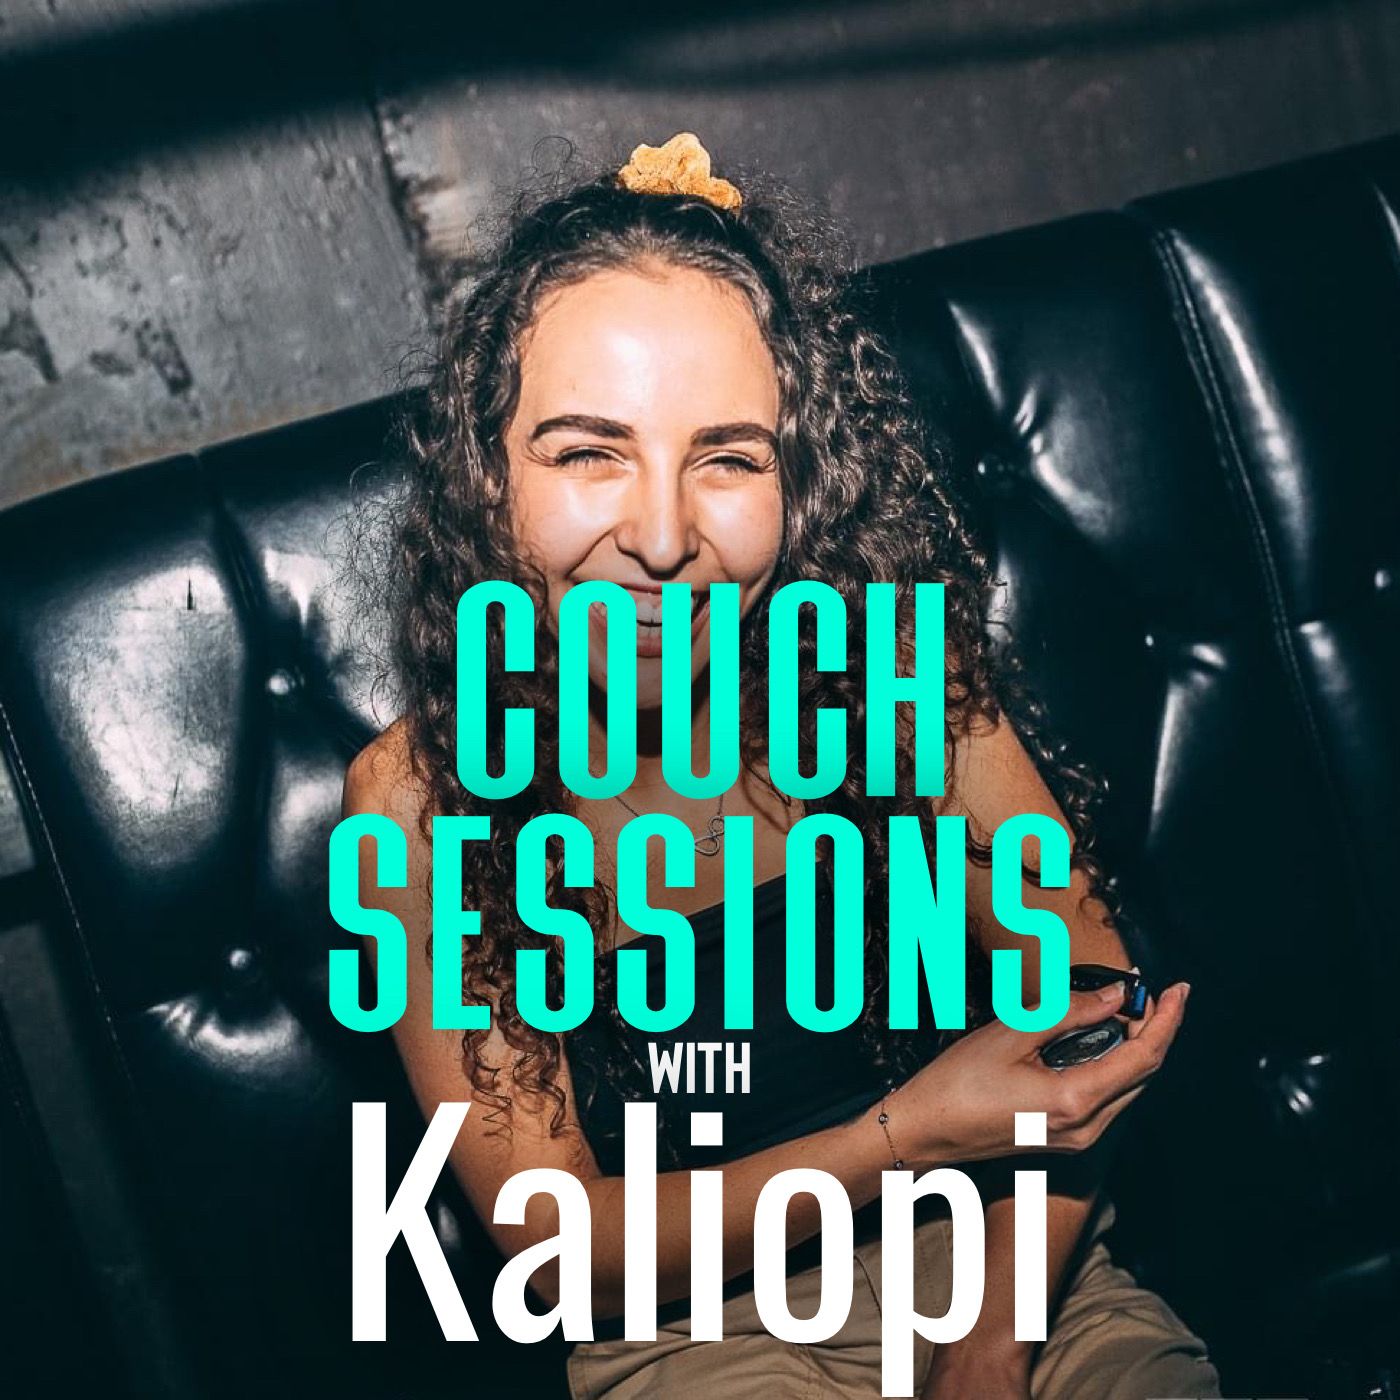 COUCH SESSIONS Episode #14 with Kaliopi